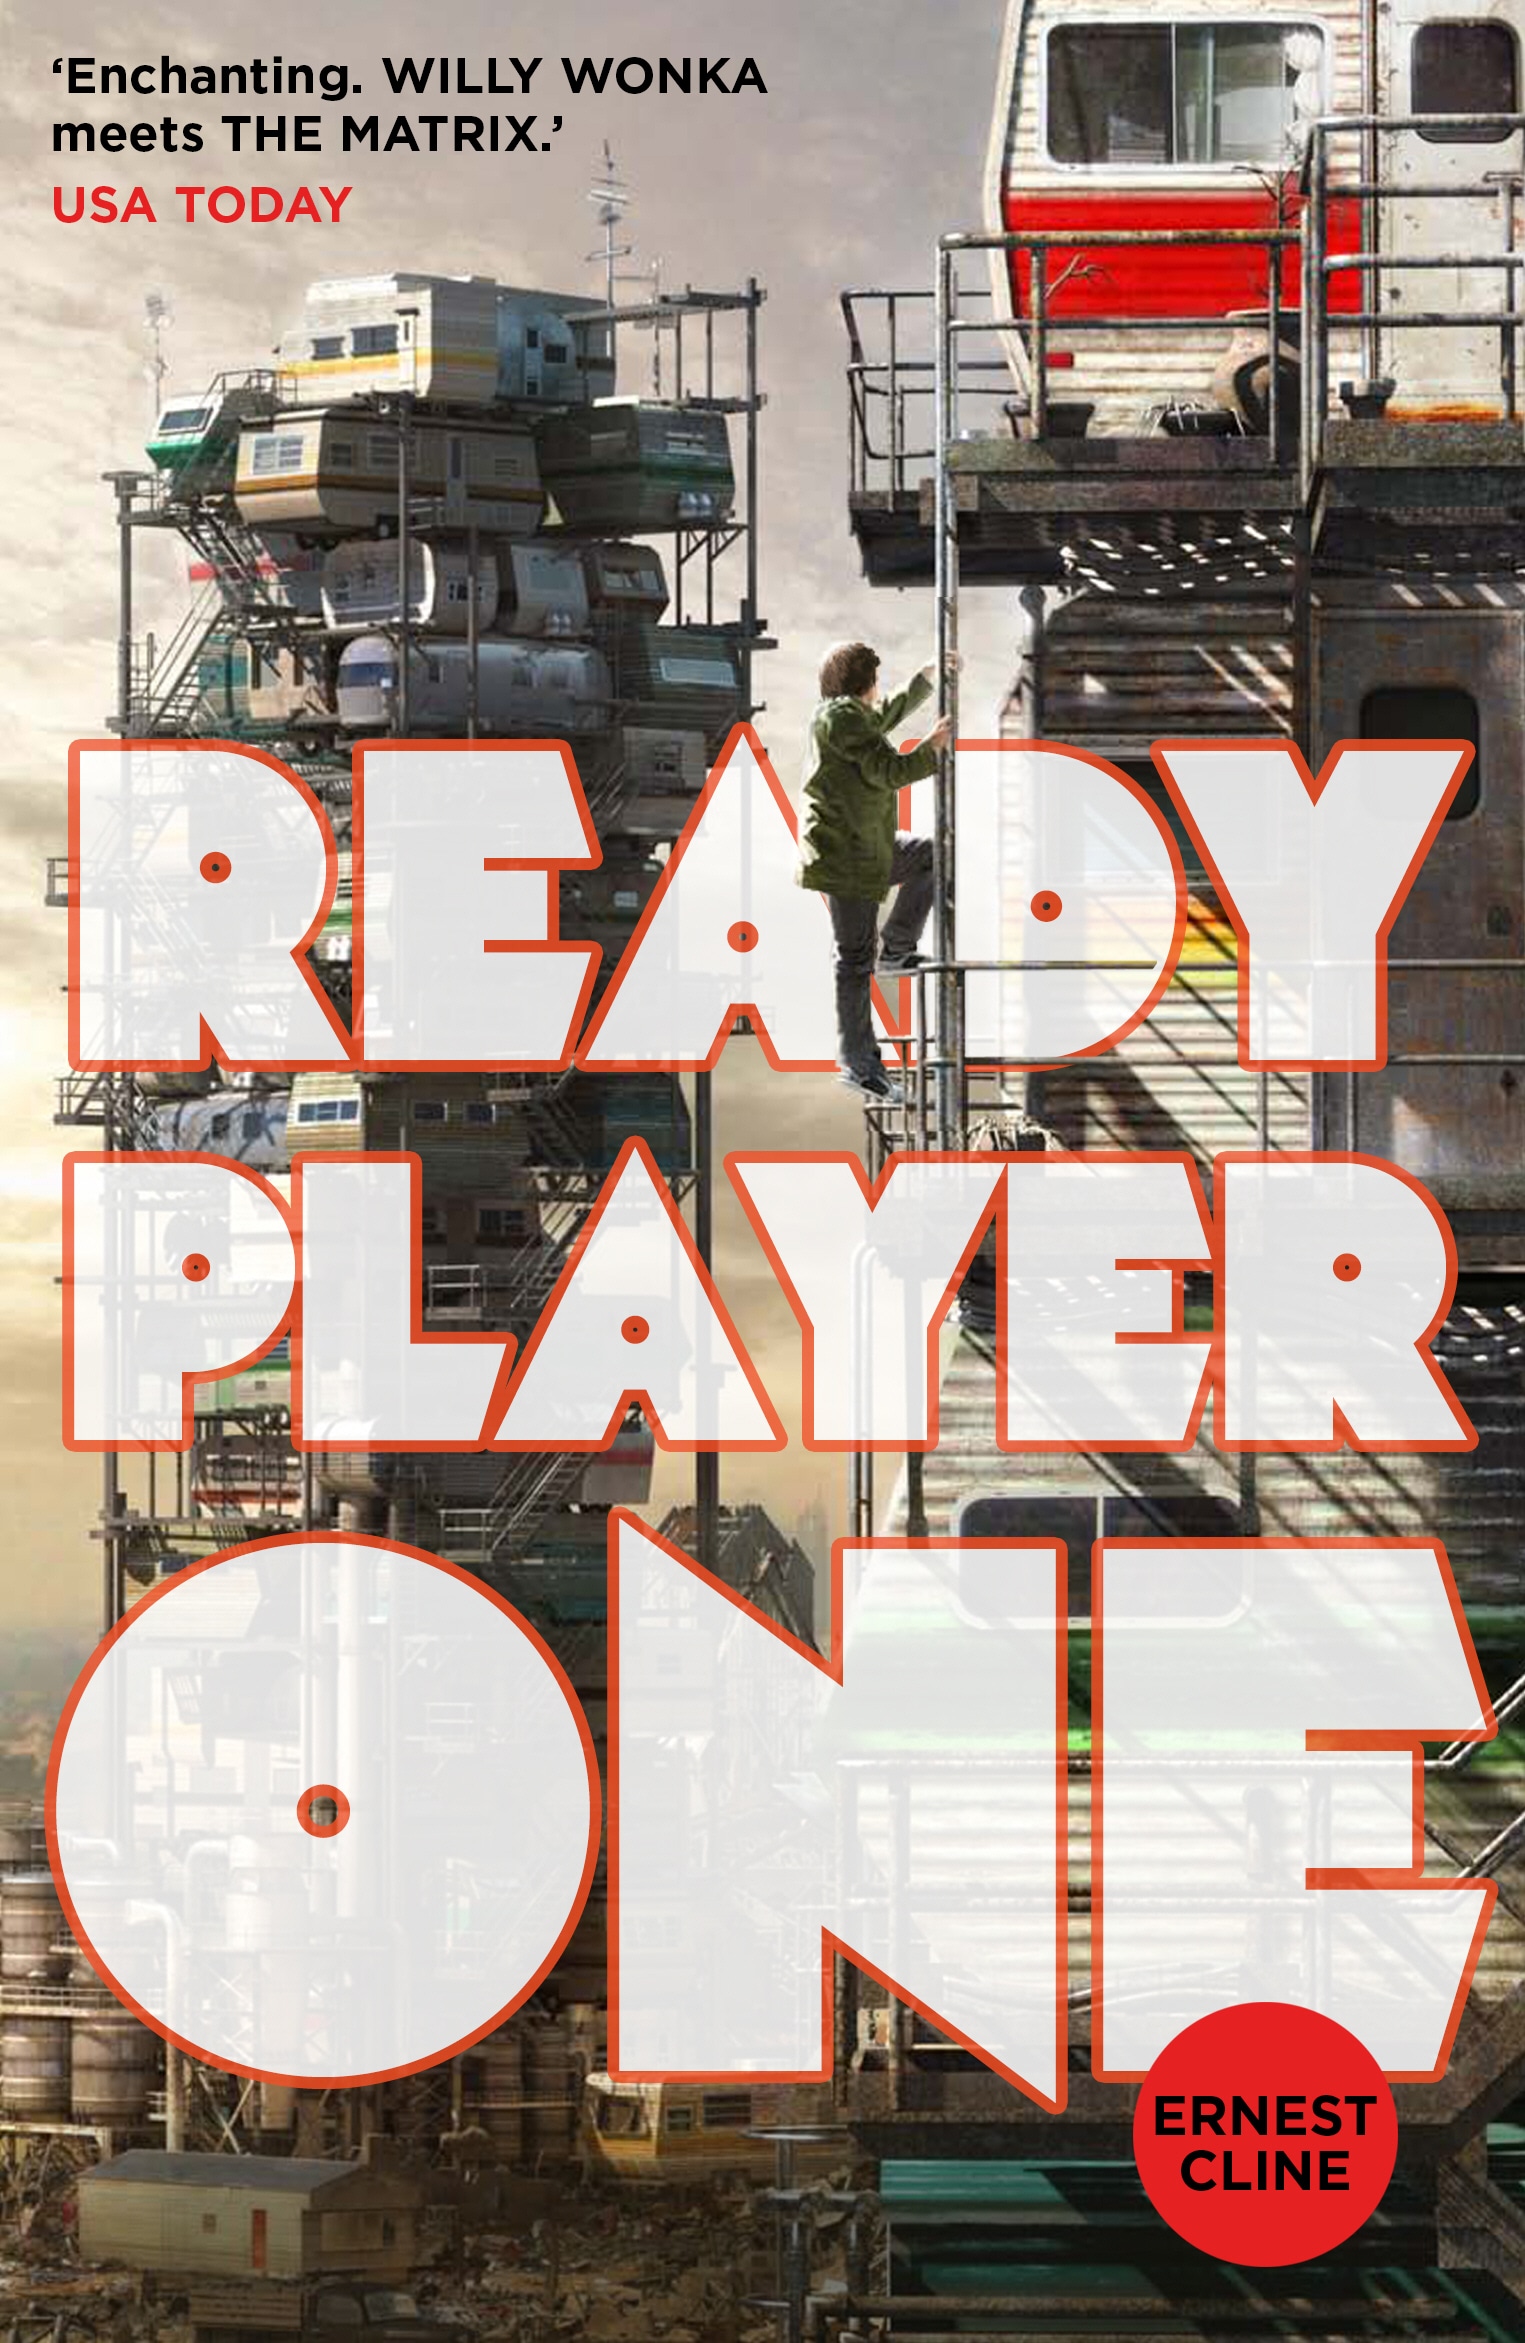 Book “Ready Player One” by Ernest Cline — April 5, 2012